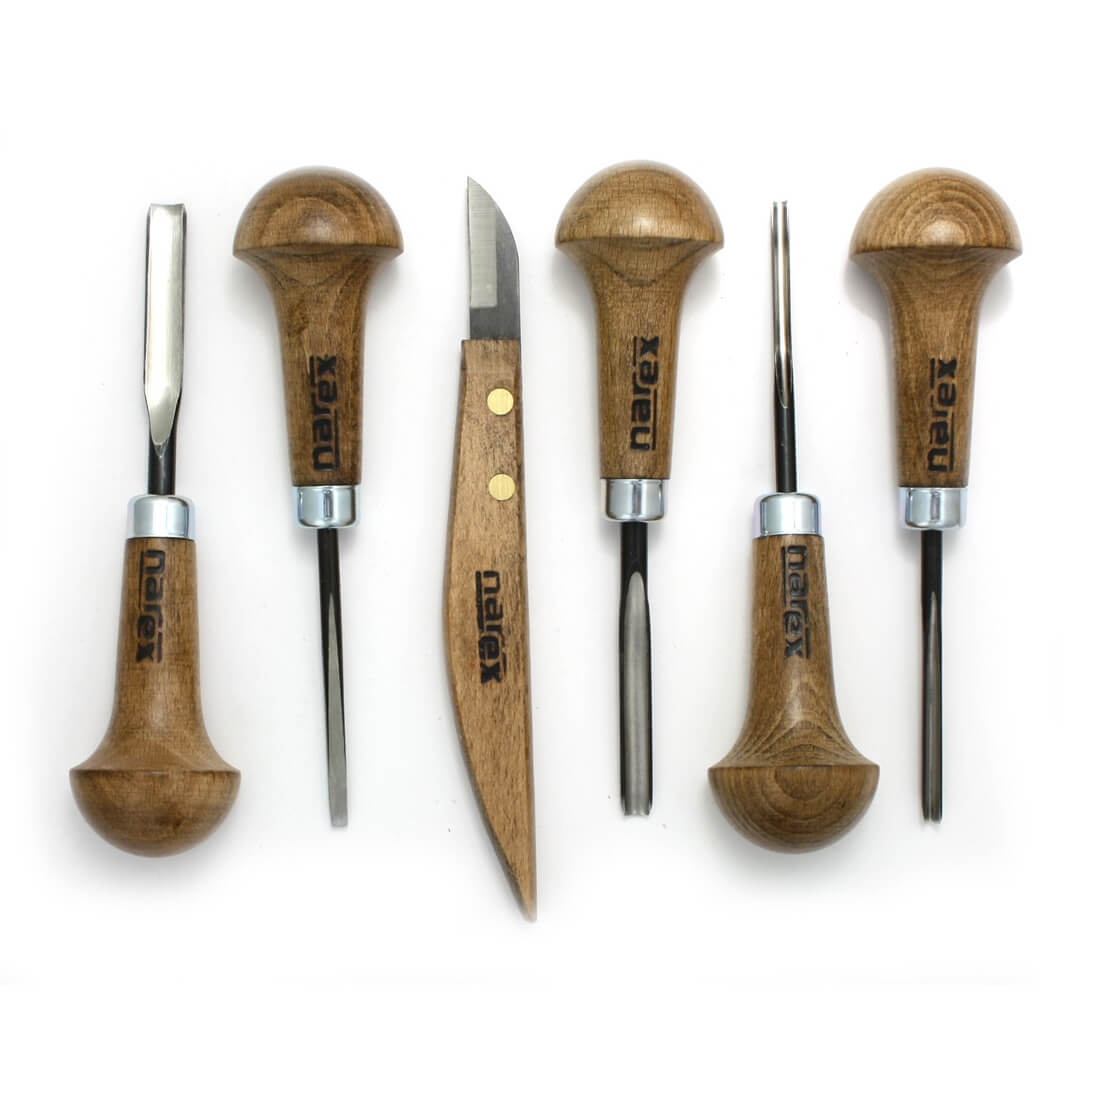 Narex Profi 6 piece Carving Set NAR-868500 includes one knife, four gouges of various widths, one narrow chisel. Knife has a long wooden handle, gouges and chisel have mushroom shaped wooden handles